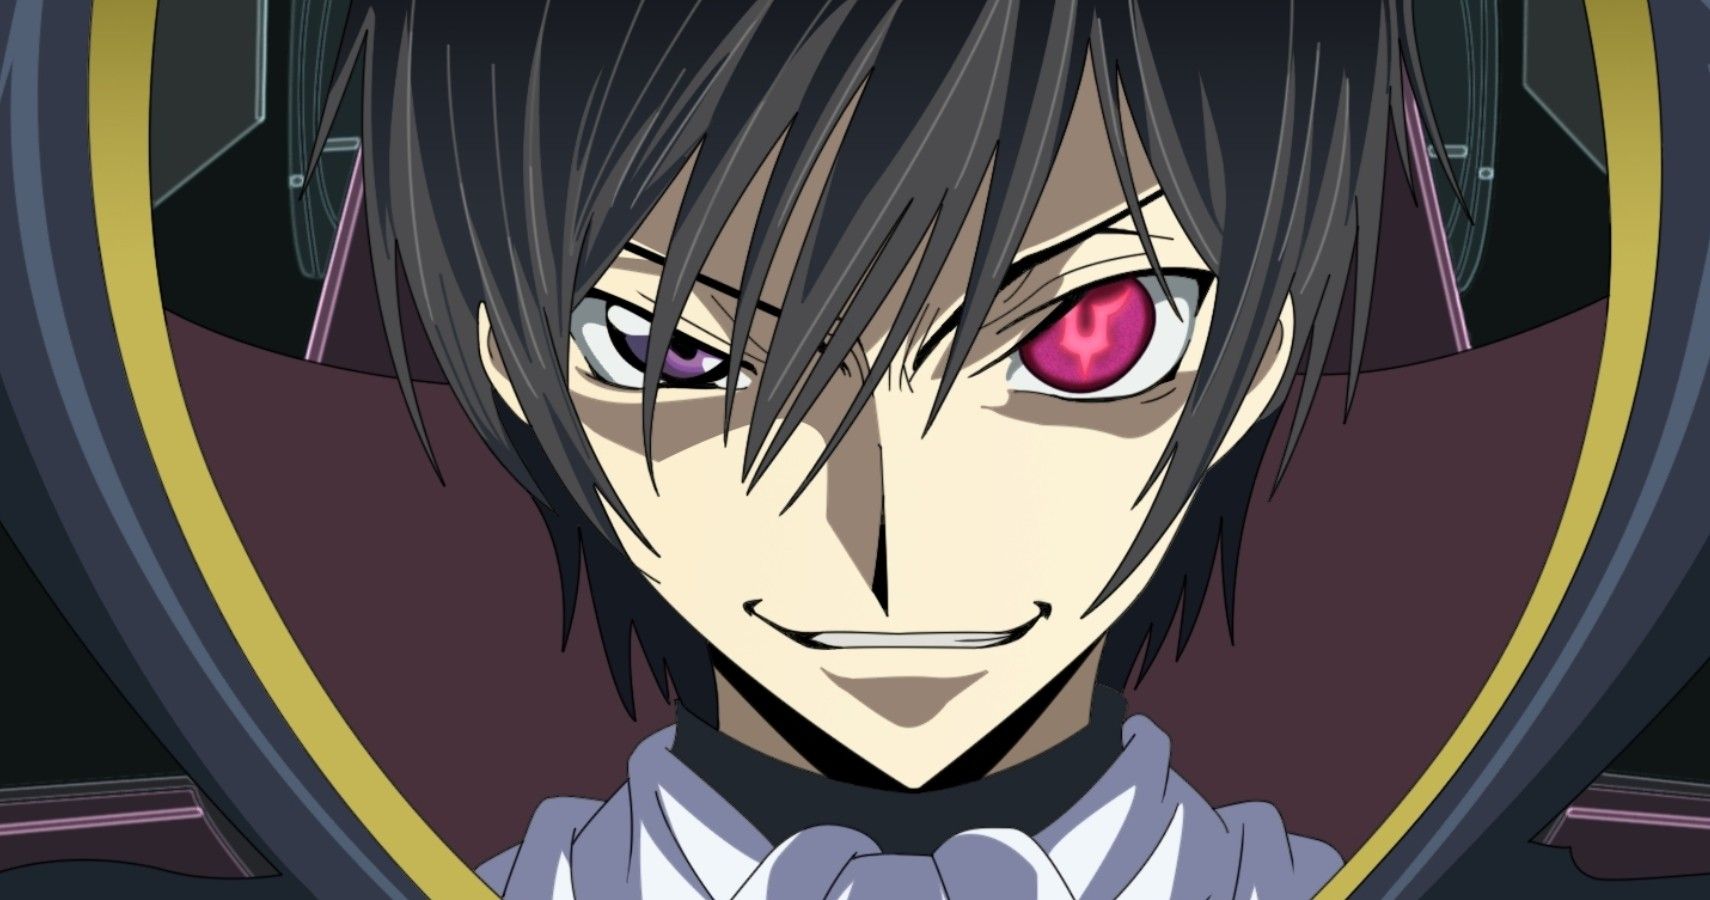 Film review – Code Geass: Lelouch of the Rebellion Episode I an